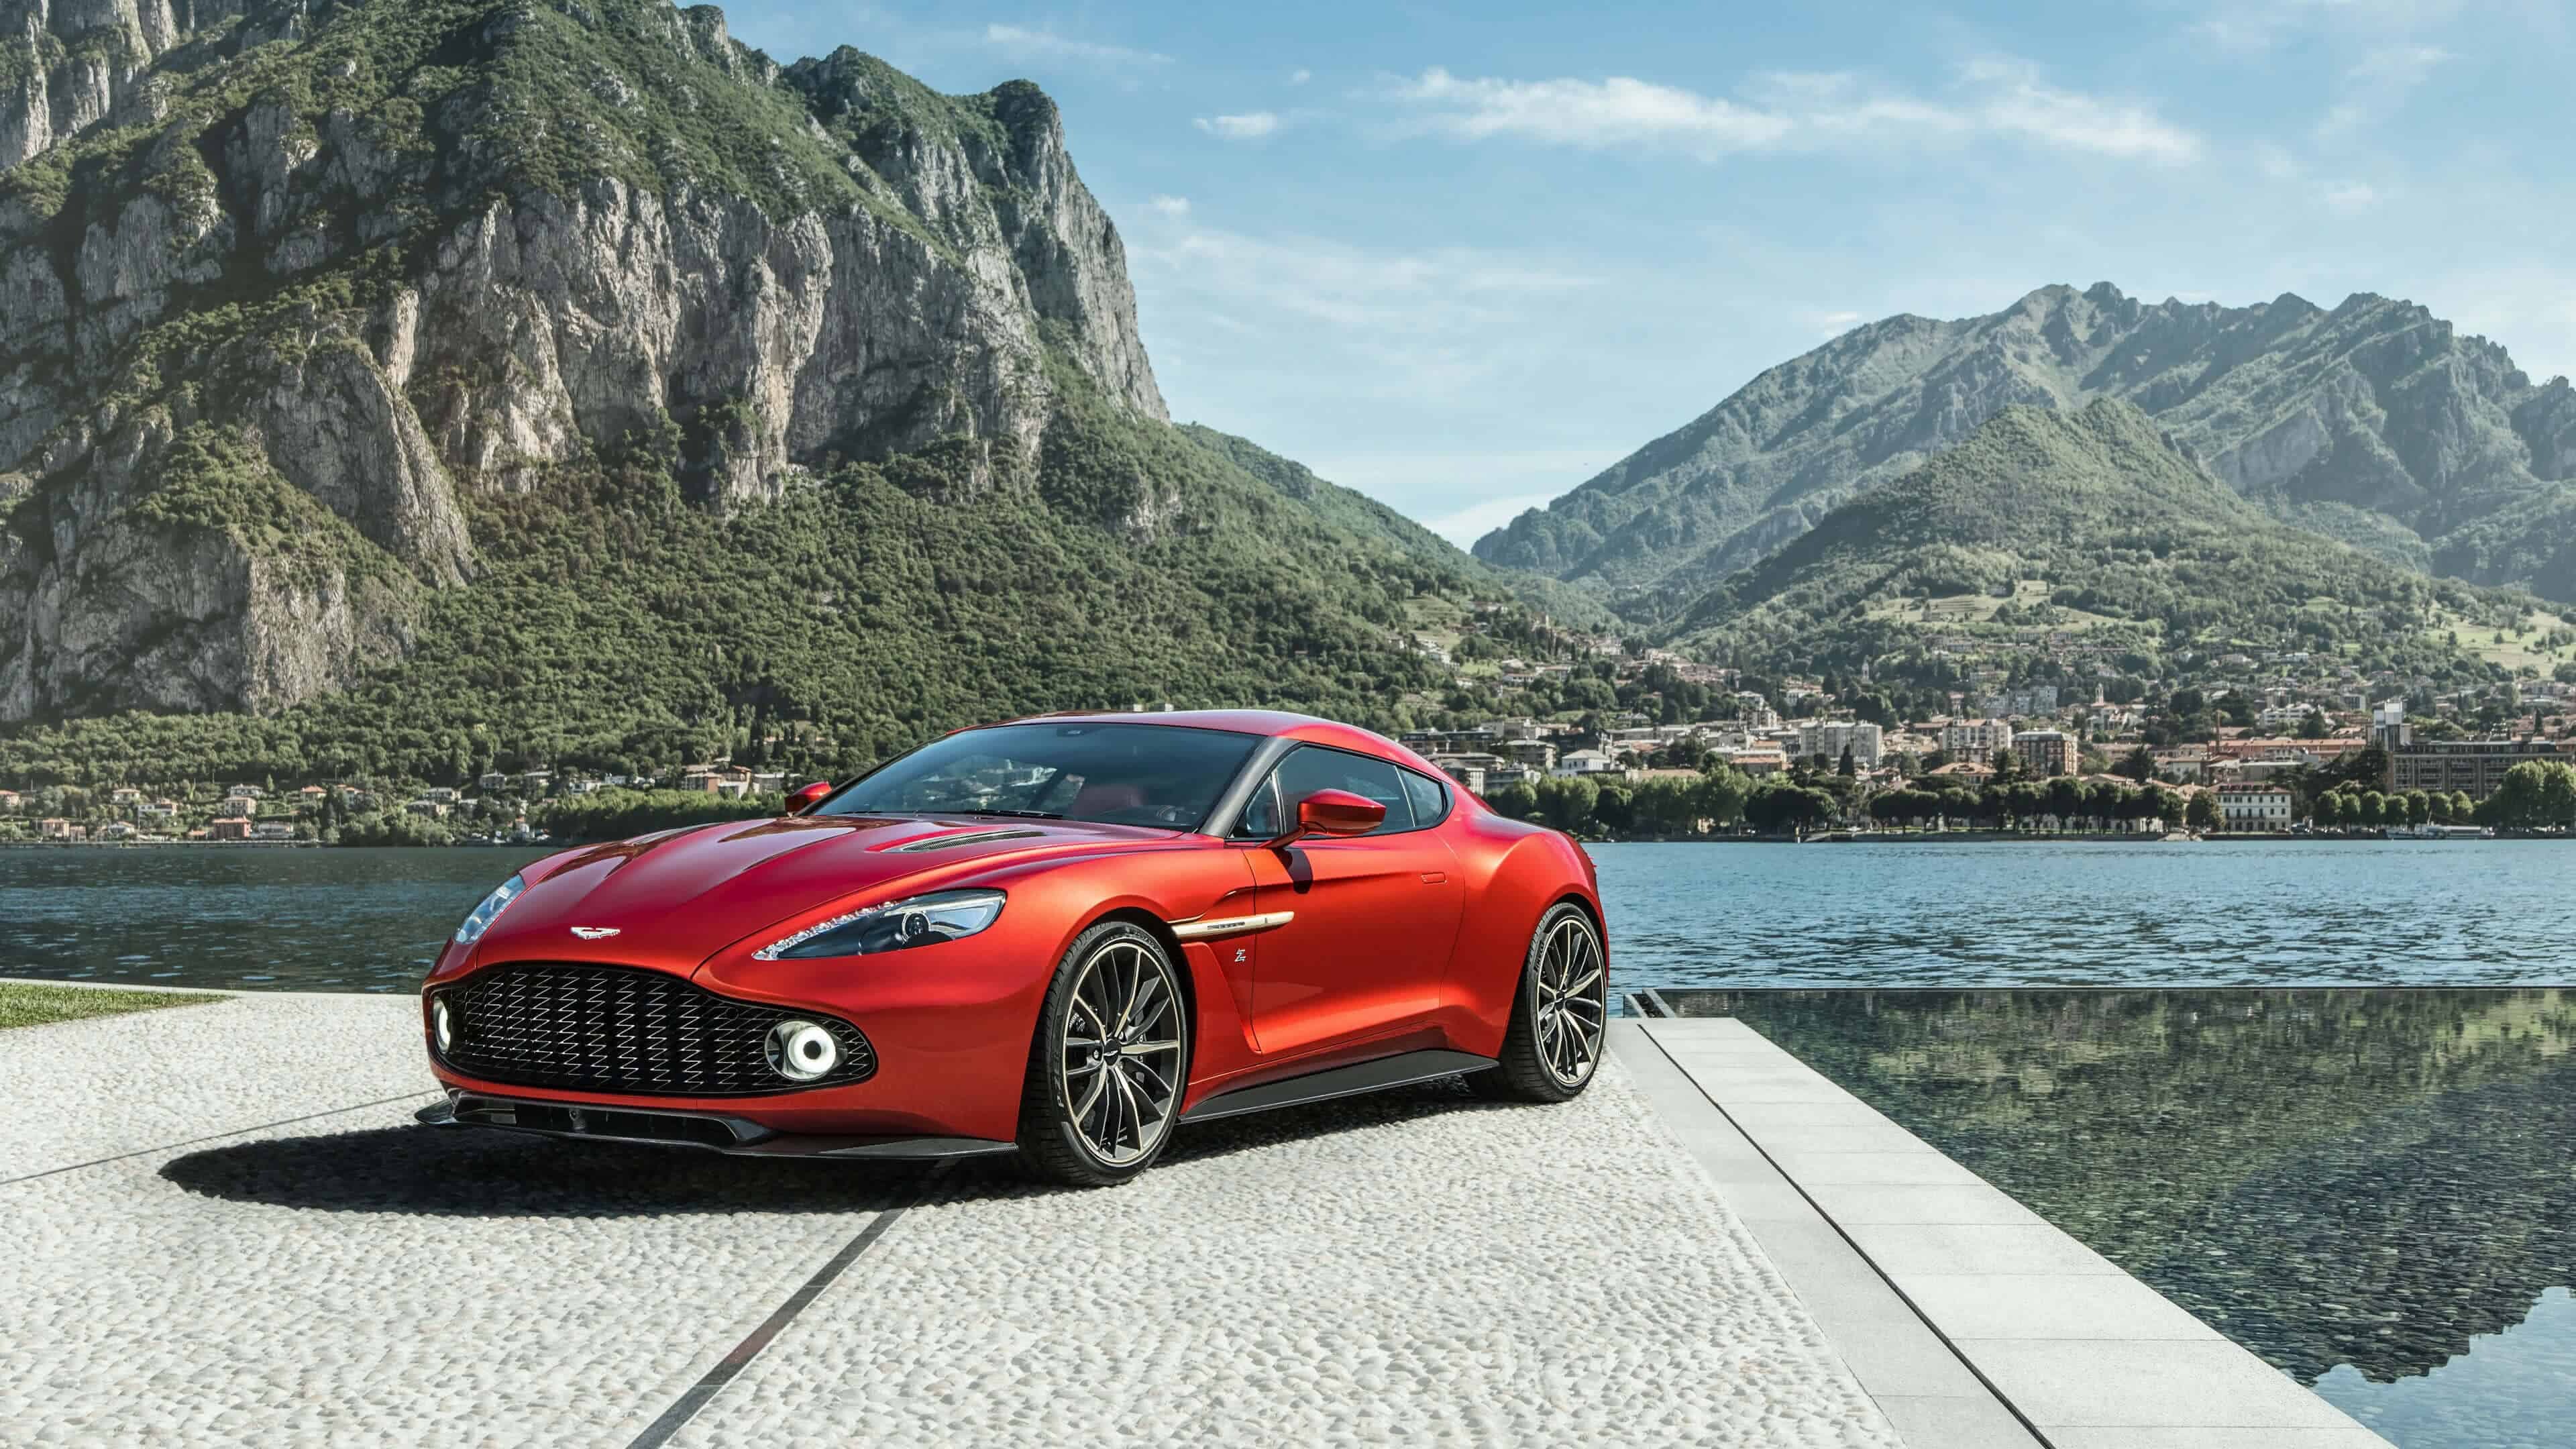 Aston Martin: A high-performance grand tourer introduced by British luxury automobile manufacturer, Vanquish Zagato Coupe. 3840x2160 4K Wallpaper.